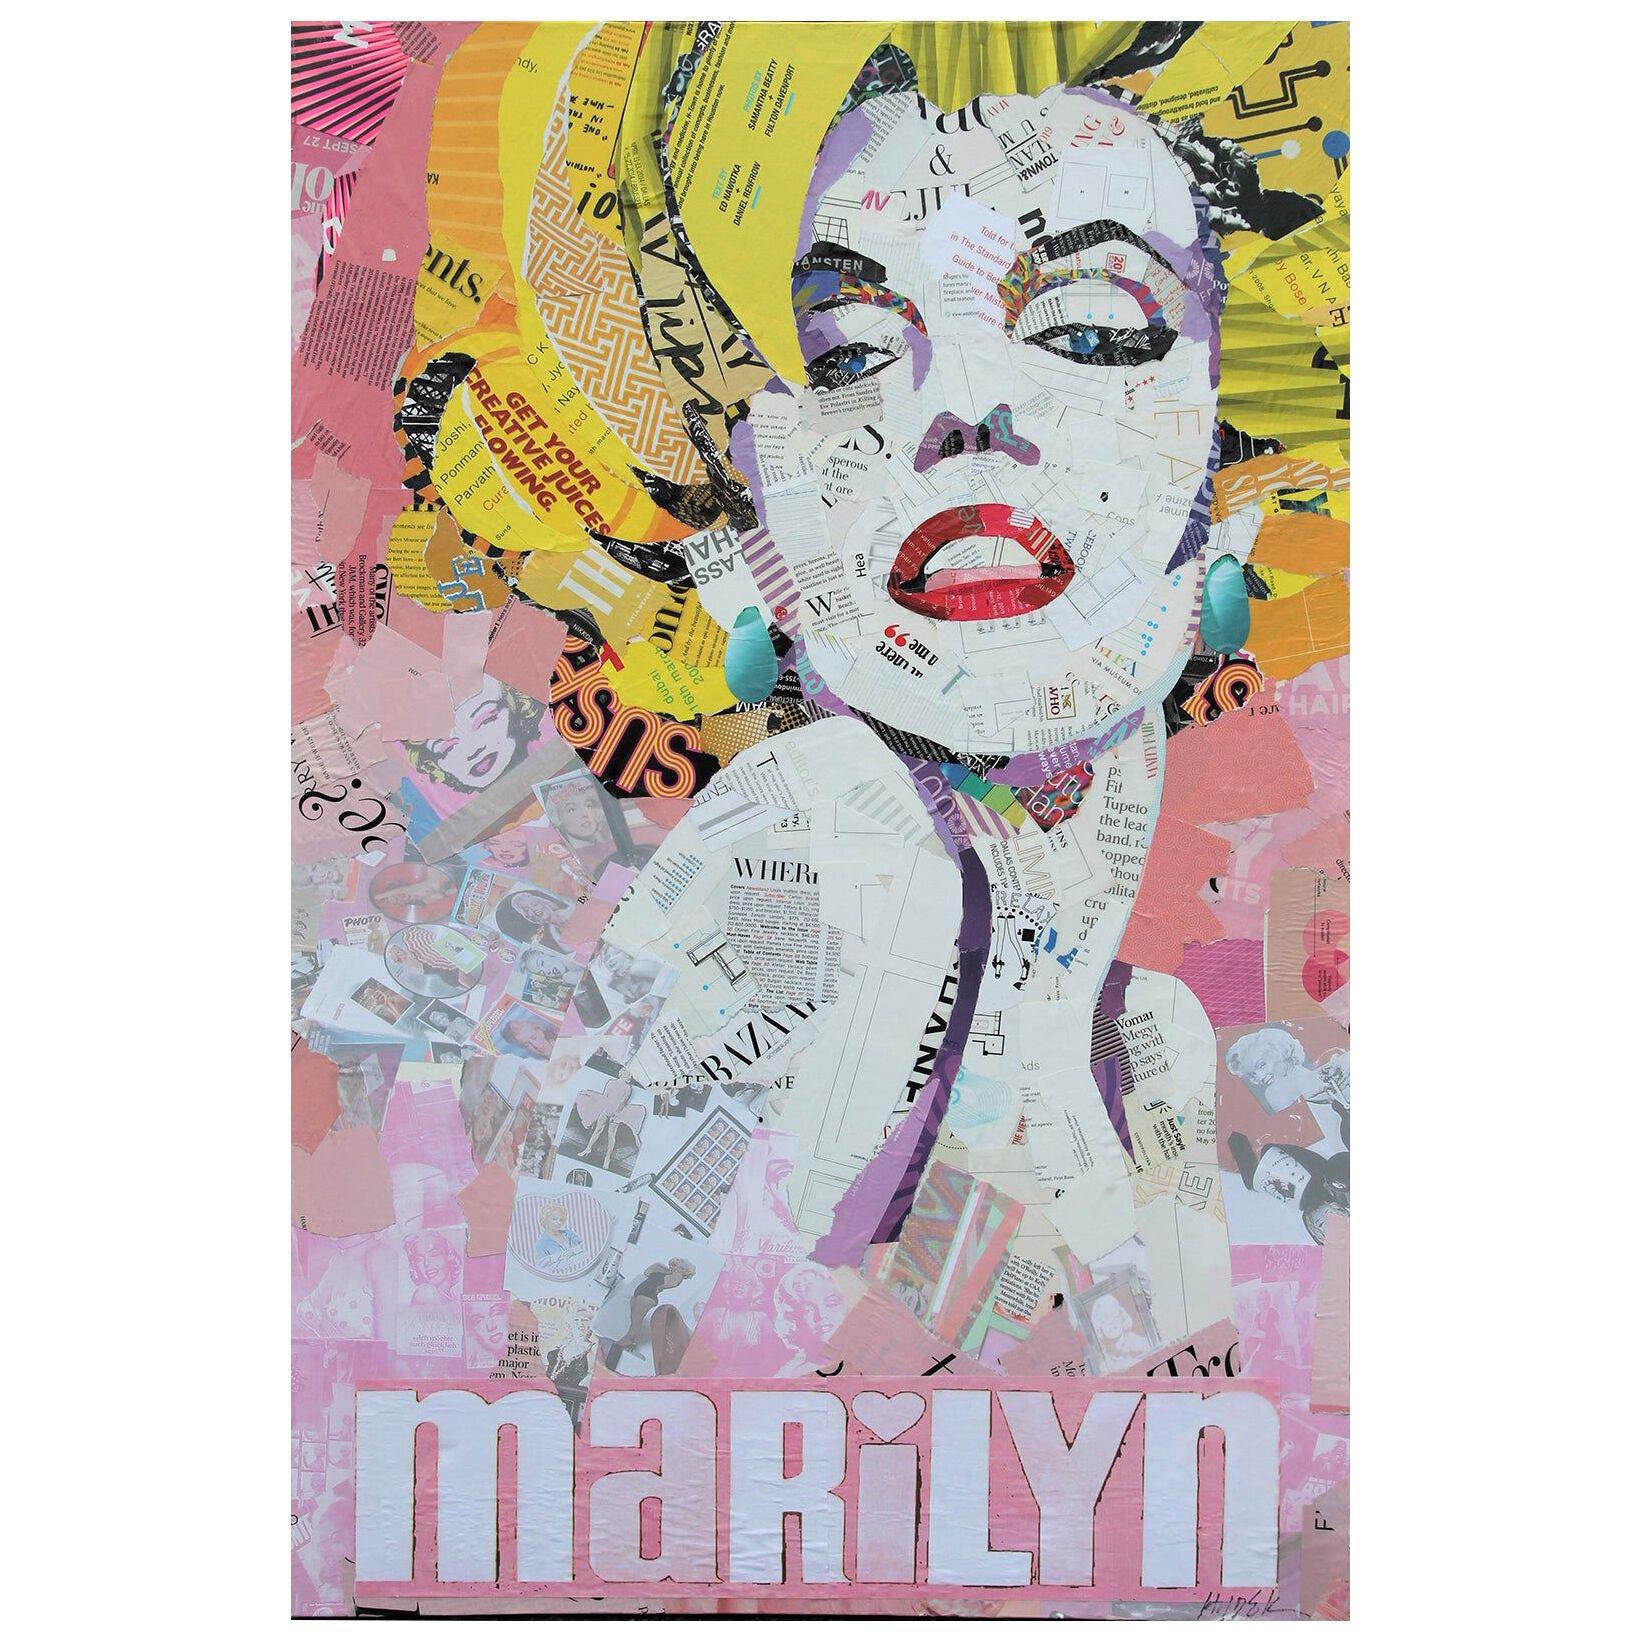 "Color me Blonde" Pink and Yellow Marilyn Monroe Mixed Media Pop Art Collage	